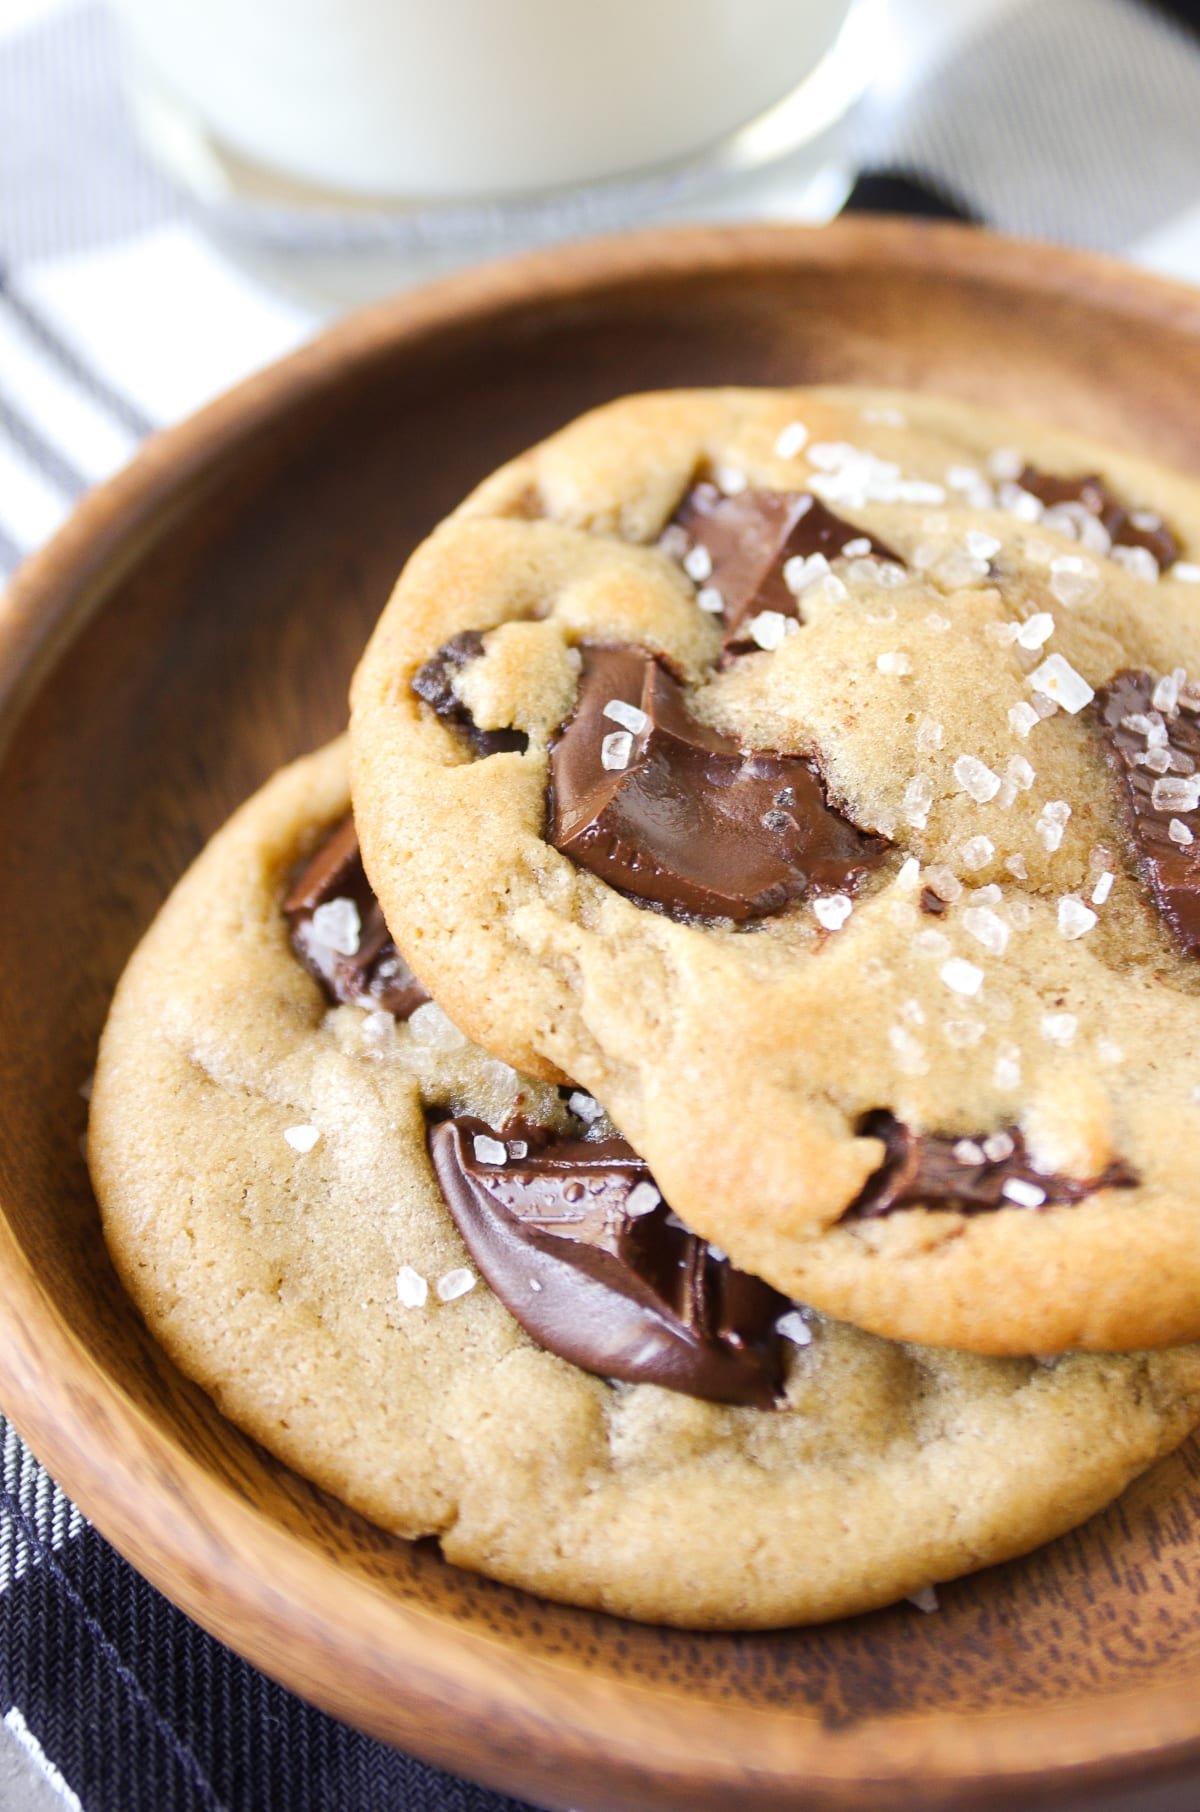 two large chocolate chunk cookies close up with melted chocolate and salt crystals on top in a wooden bowl.